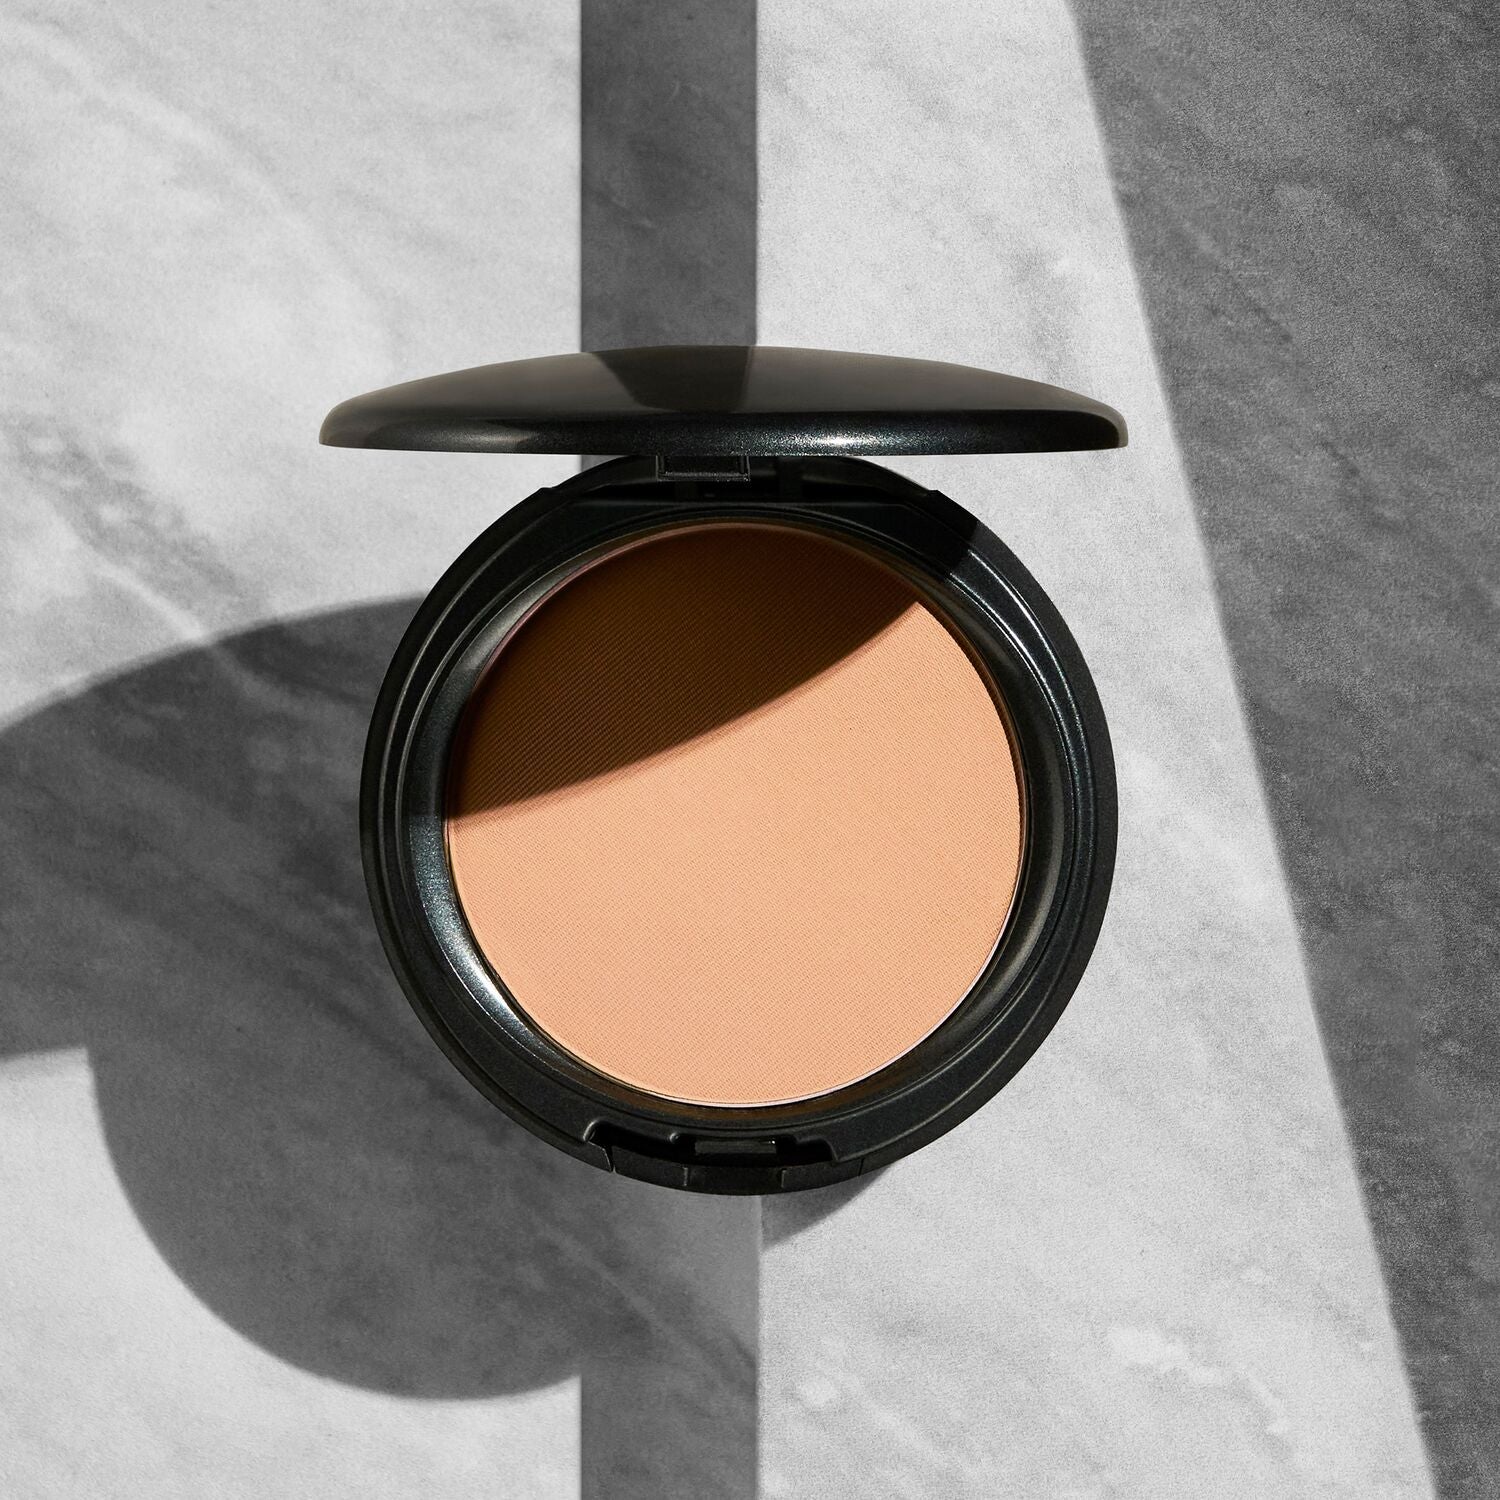 Coverfx Pressed Mineral Foundation in shade M1